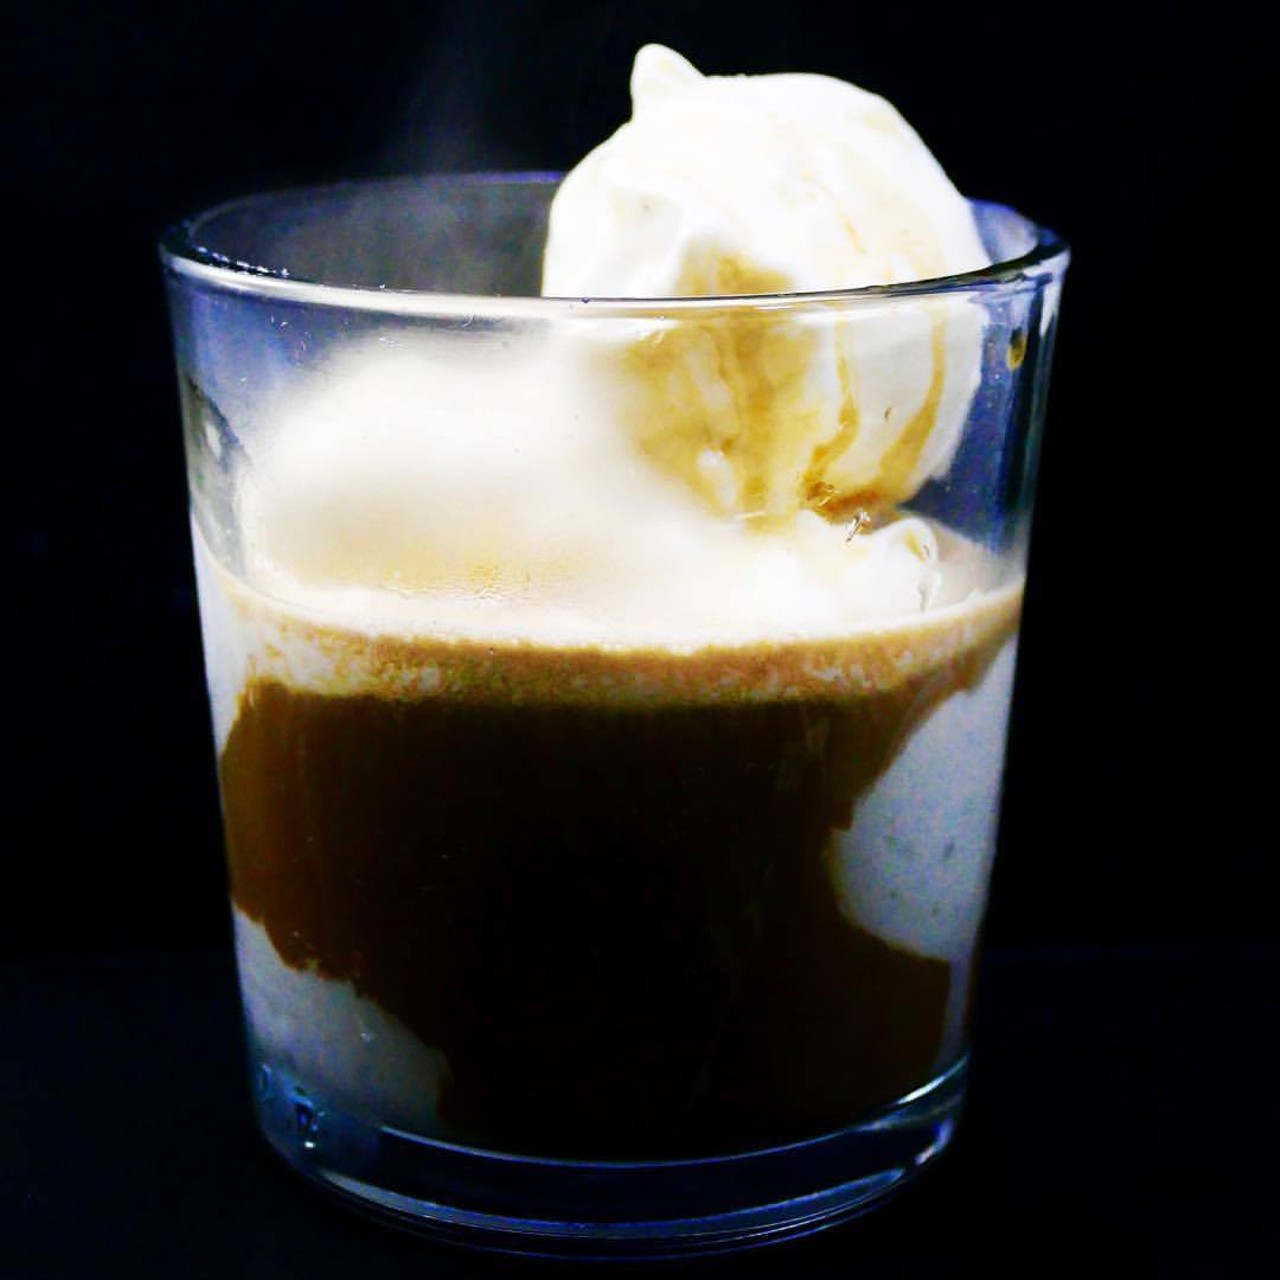 Affogato
Nice Modern Creamery aka Milkster Nitrogen Creamery
31055 John R Rd., Madison Heights; 248-802-7353
milkster.com
Sometimes we&#146;re in the mood for a sophisticated yet mind-blowing treat, and that&#146;s when we reach for Milkster&#146;s affogatos. The shop&#146;s amazing nitrogen ice cream meets fresh espresso in this cup of joy, and we wonder why we don&#146;t combine these two things all the time. Cozy up with your hot and cold treat and just be happy. 
Photo from Milkster Nitrogen Creamery / Facebook 